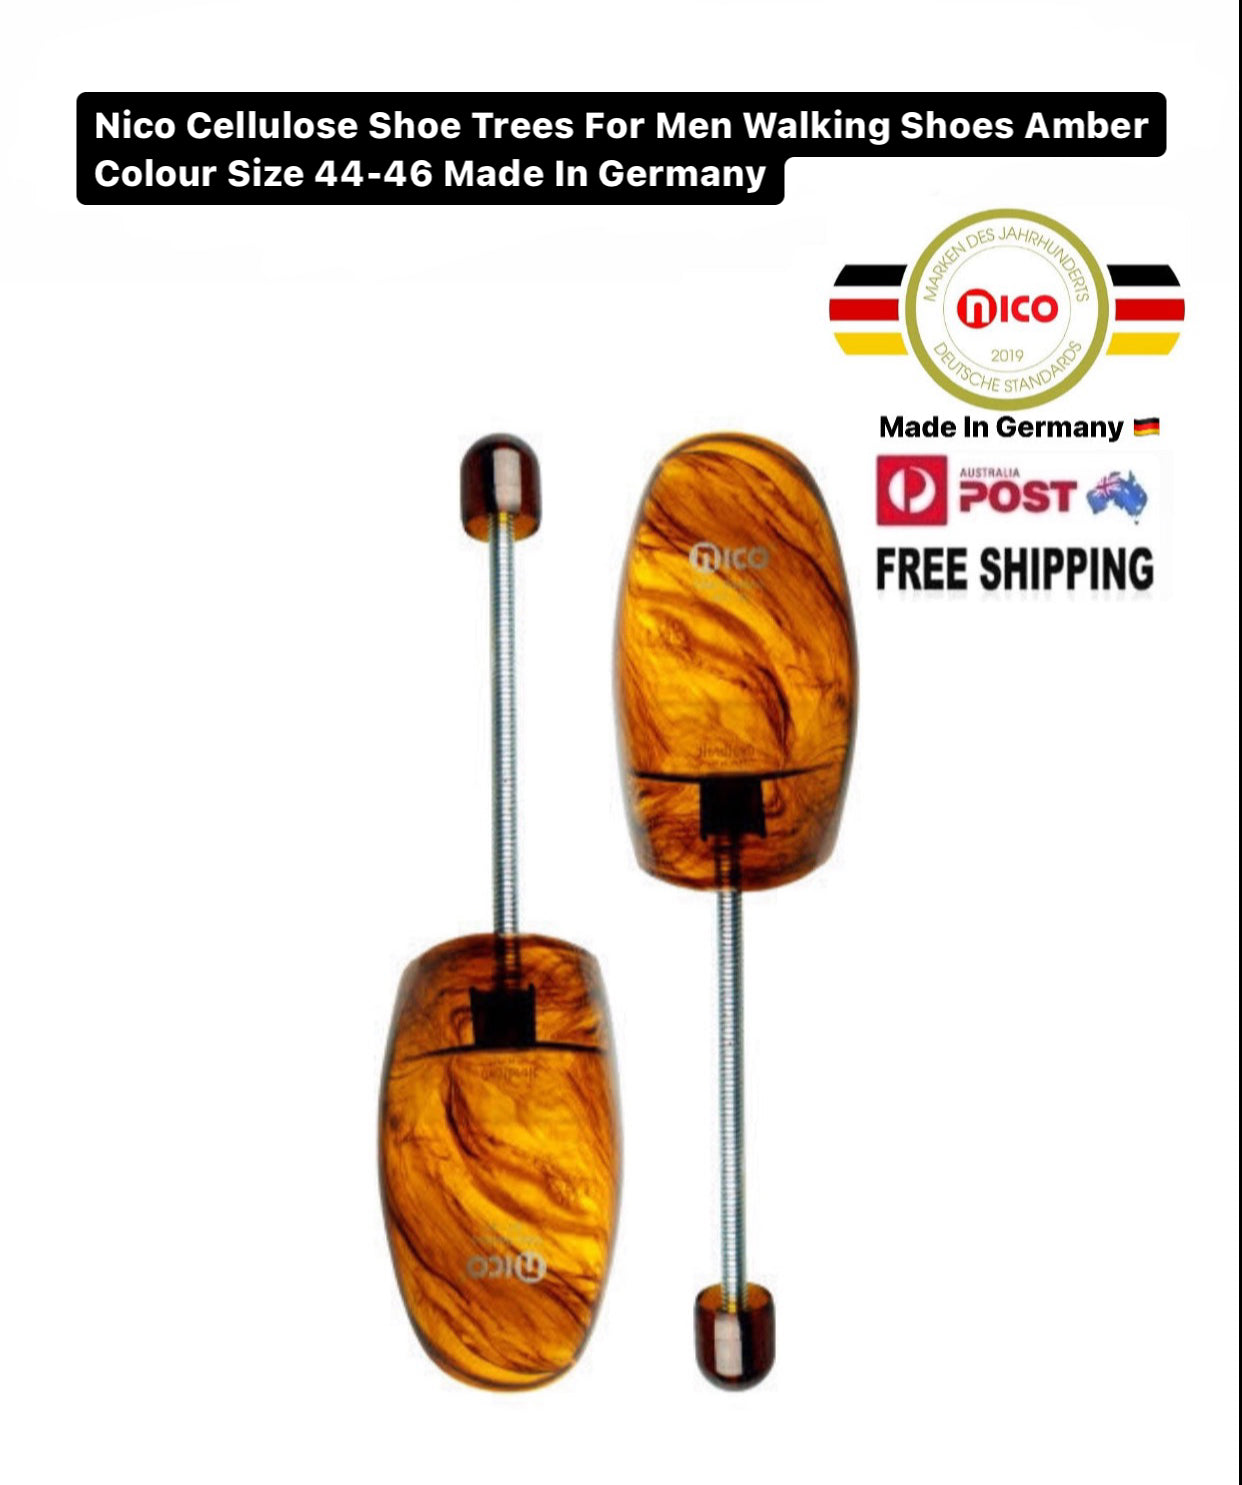 Nico Cellulose Shoe Trees For Men Walking Shoes Amber Colour Size 44-46 Made In Germany